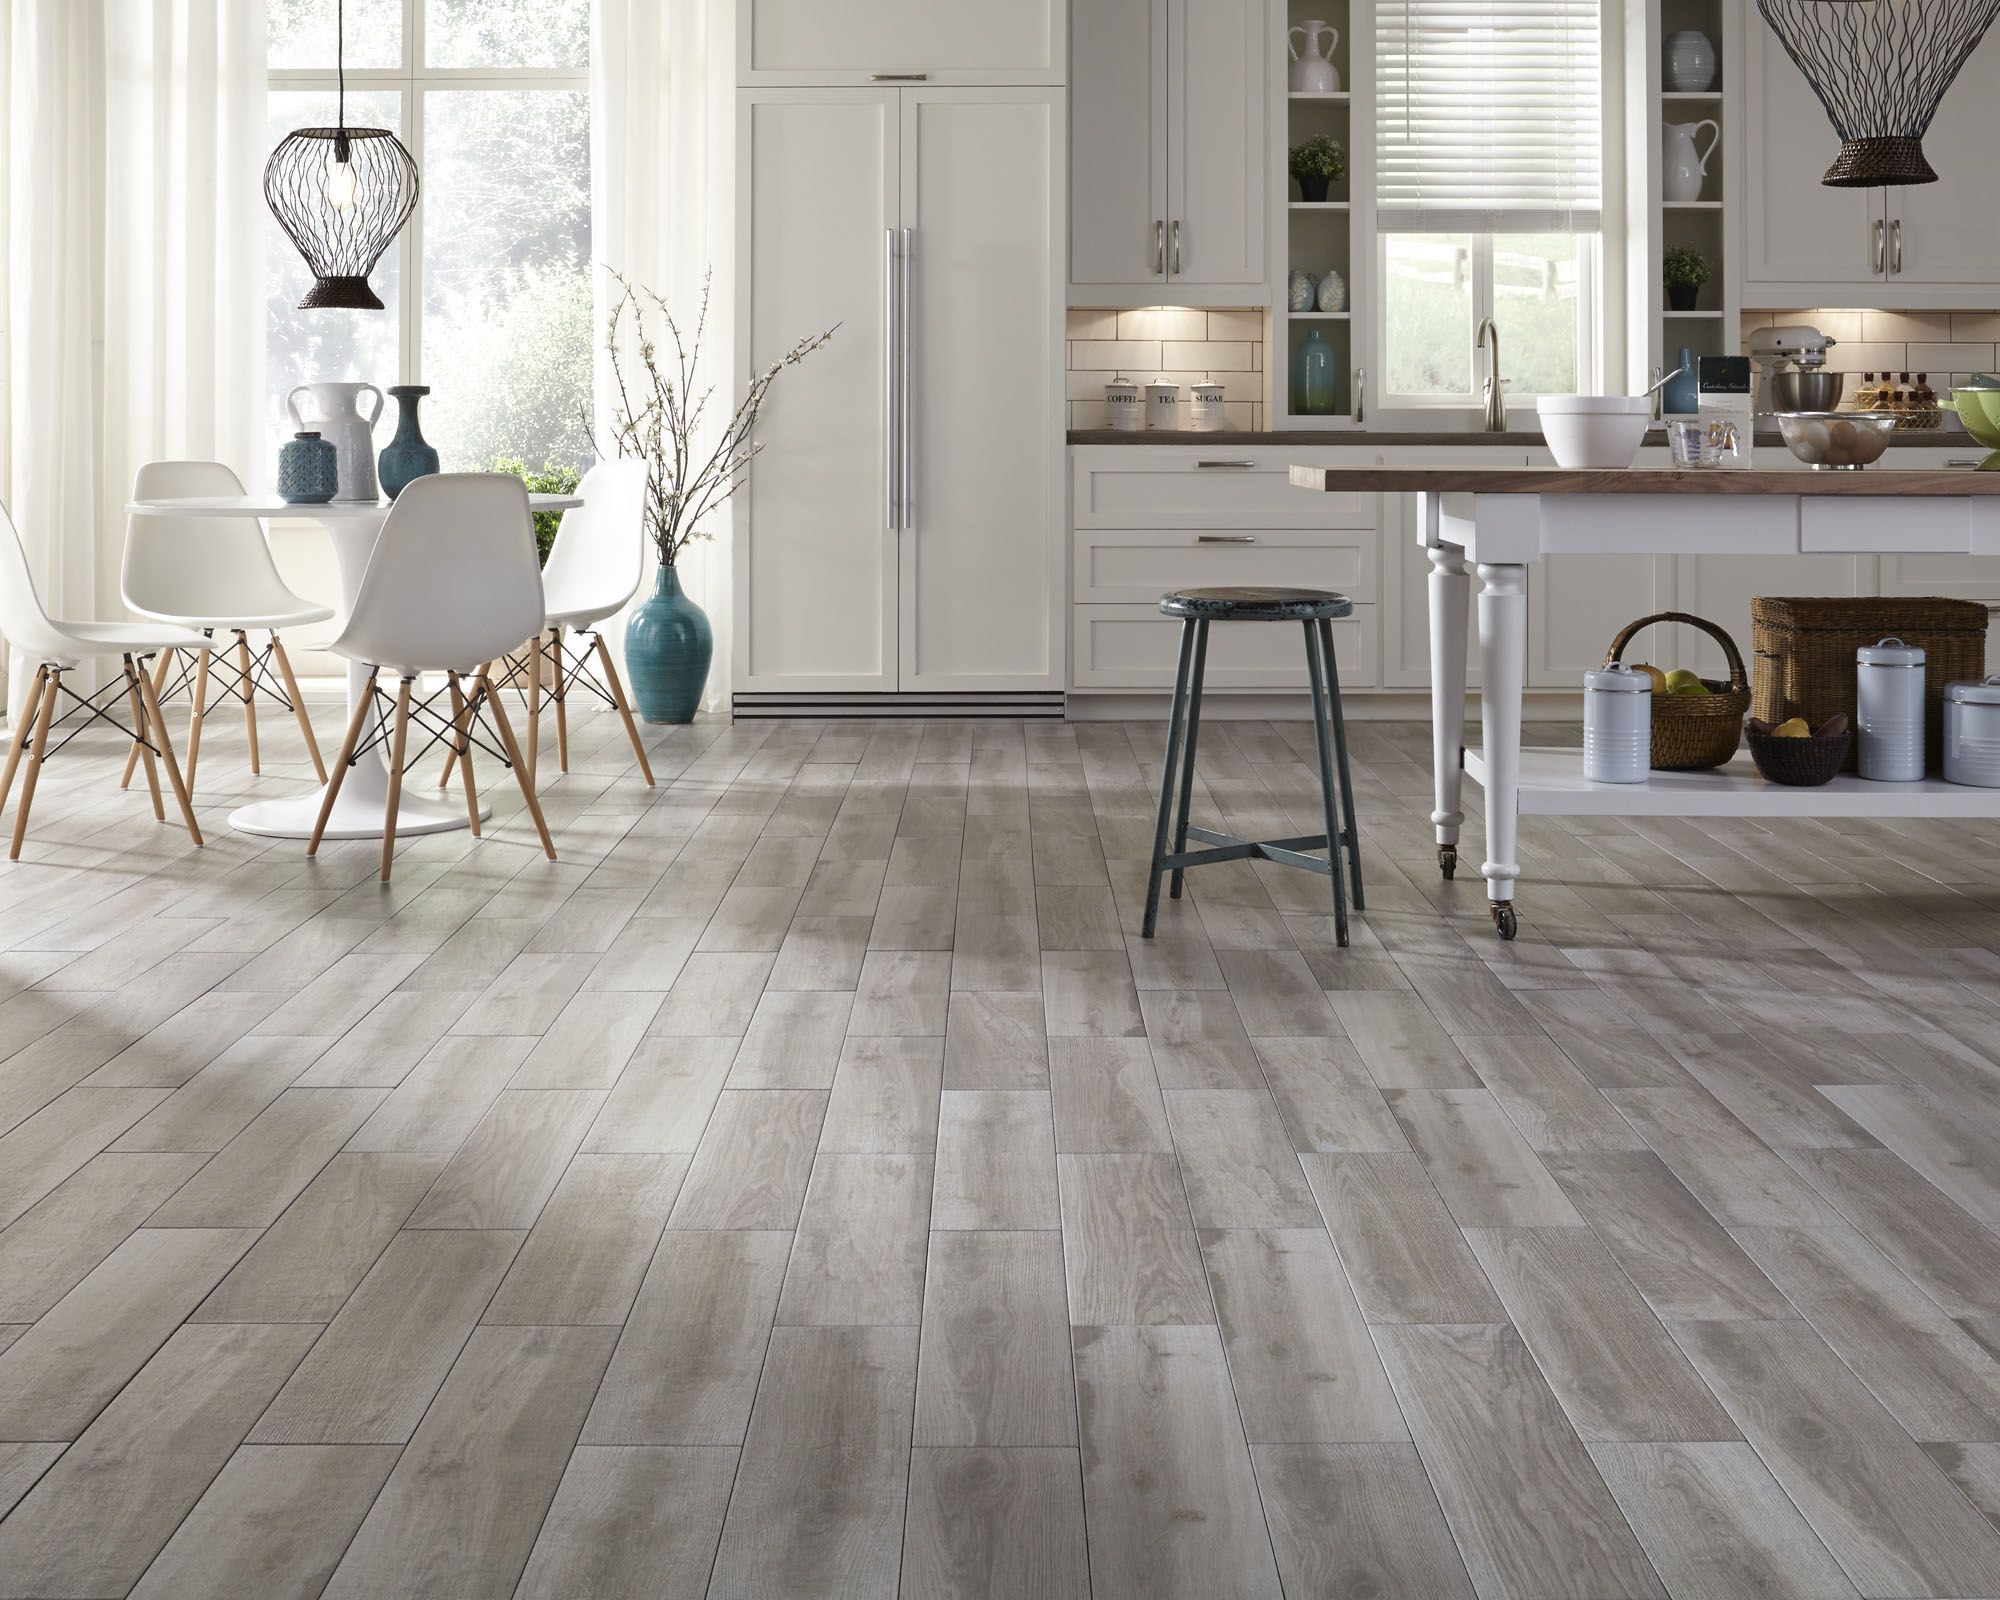 3. How to Maintain Wooden Grey Floors for Maximum Durability 